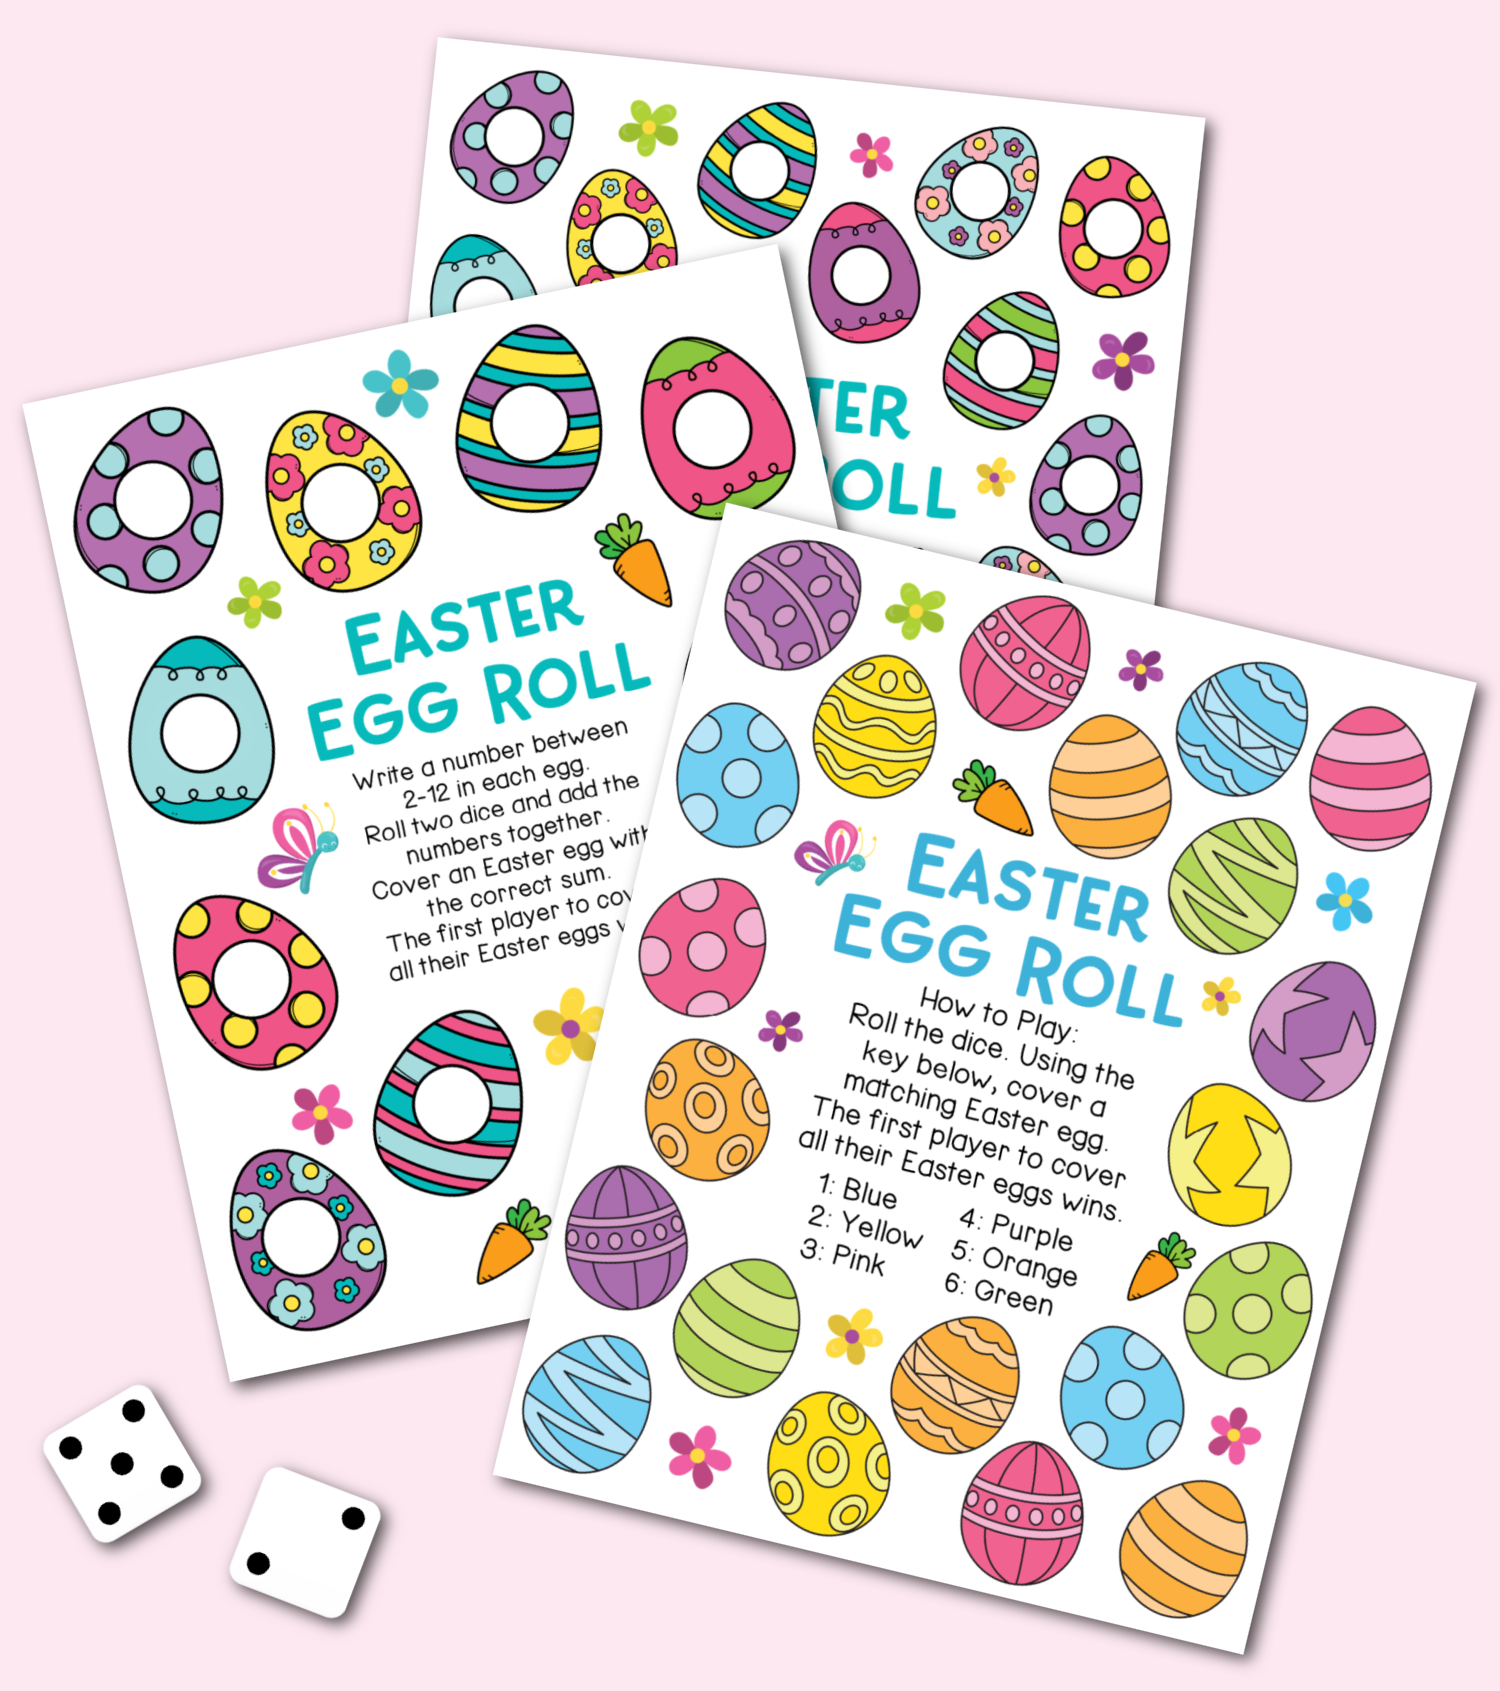 Easter Egg Roll Dice Games - Free Printable Easter Games